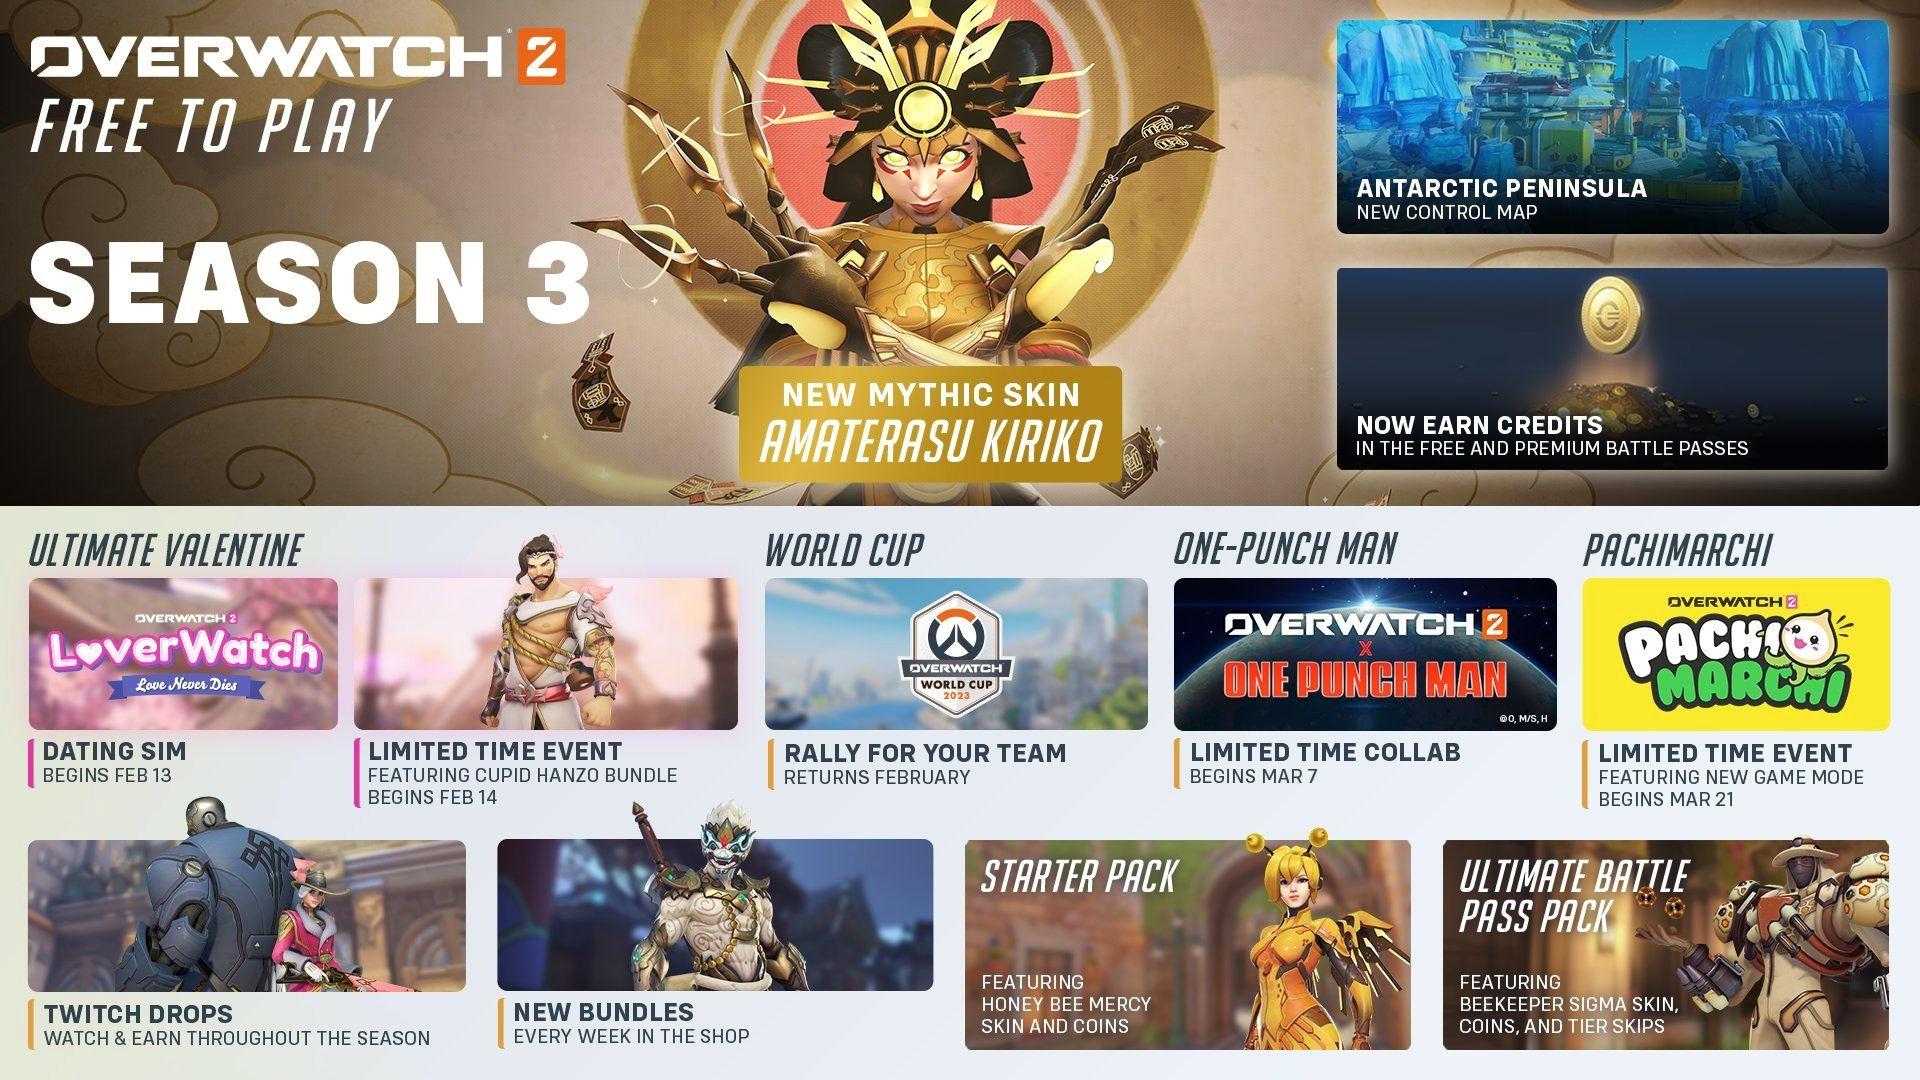 Overwatch 2 season 3 release date: The official roadmap for Overwatch 2 season 3 and beyond, which follows on from Blizzard